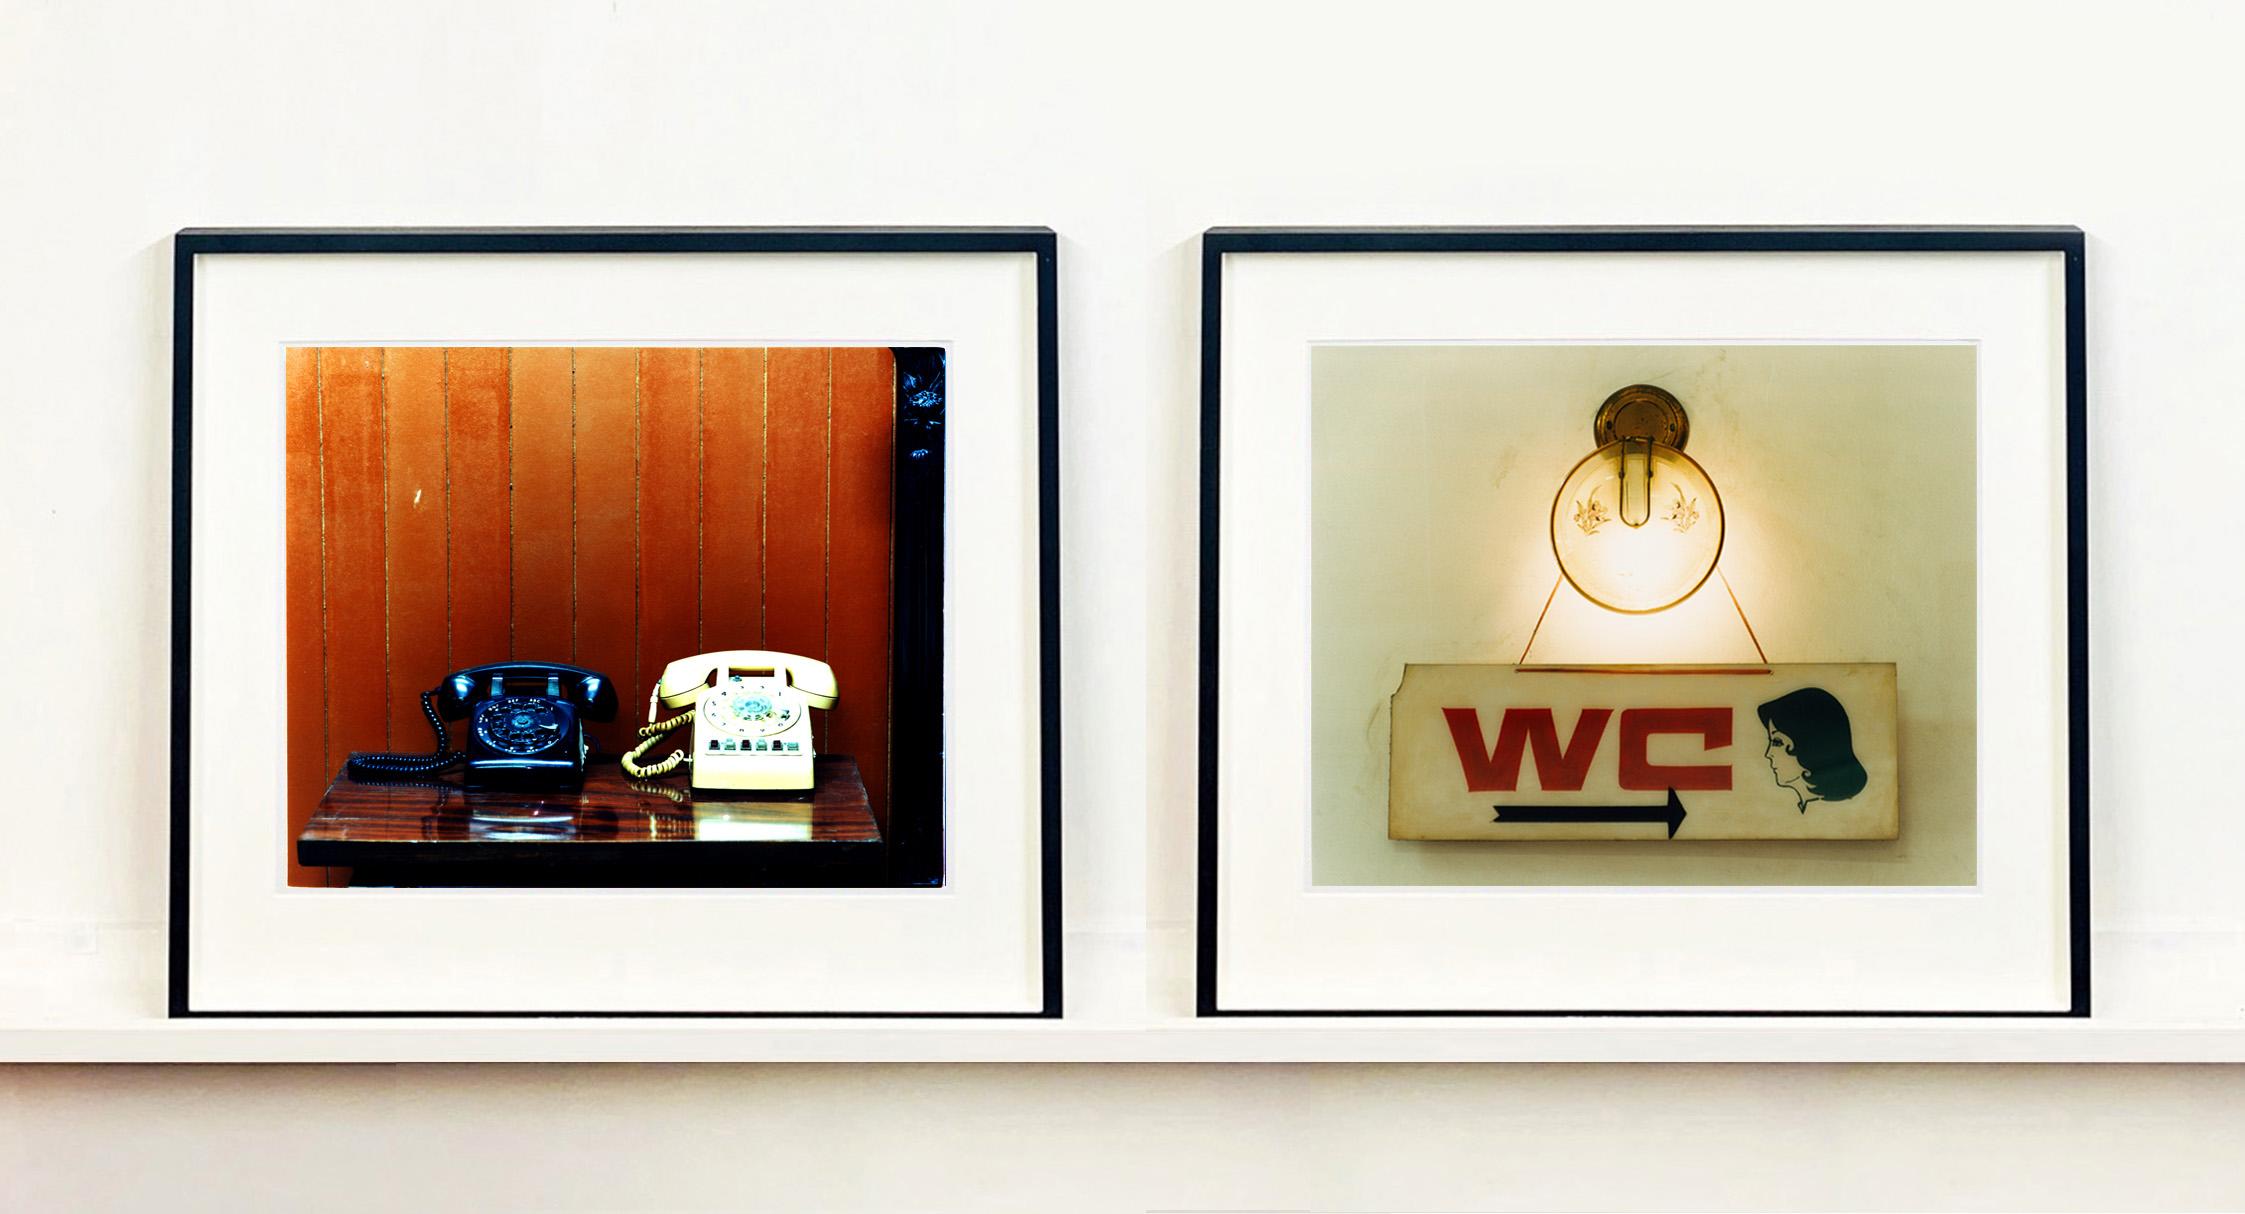 WC, Ho Chi Minh City - Typography Color Photography - Contemporary Print by Richard Heeps